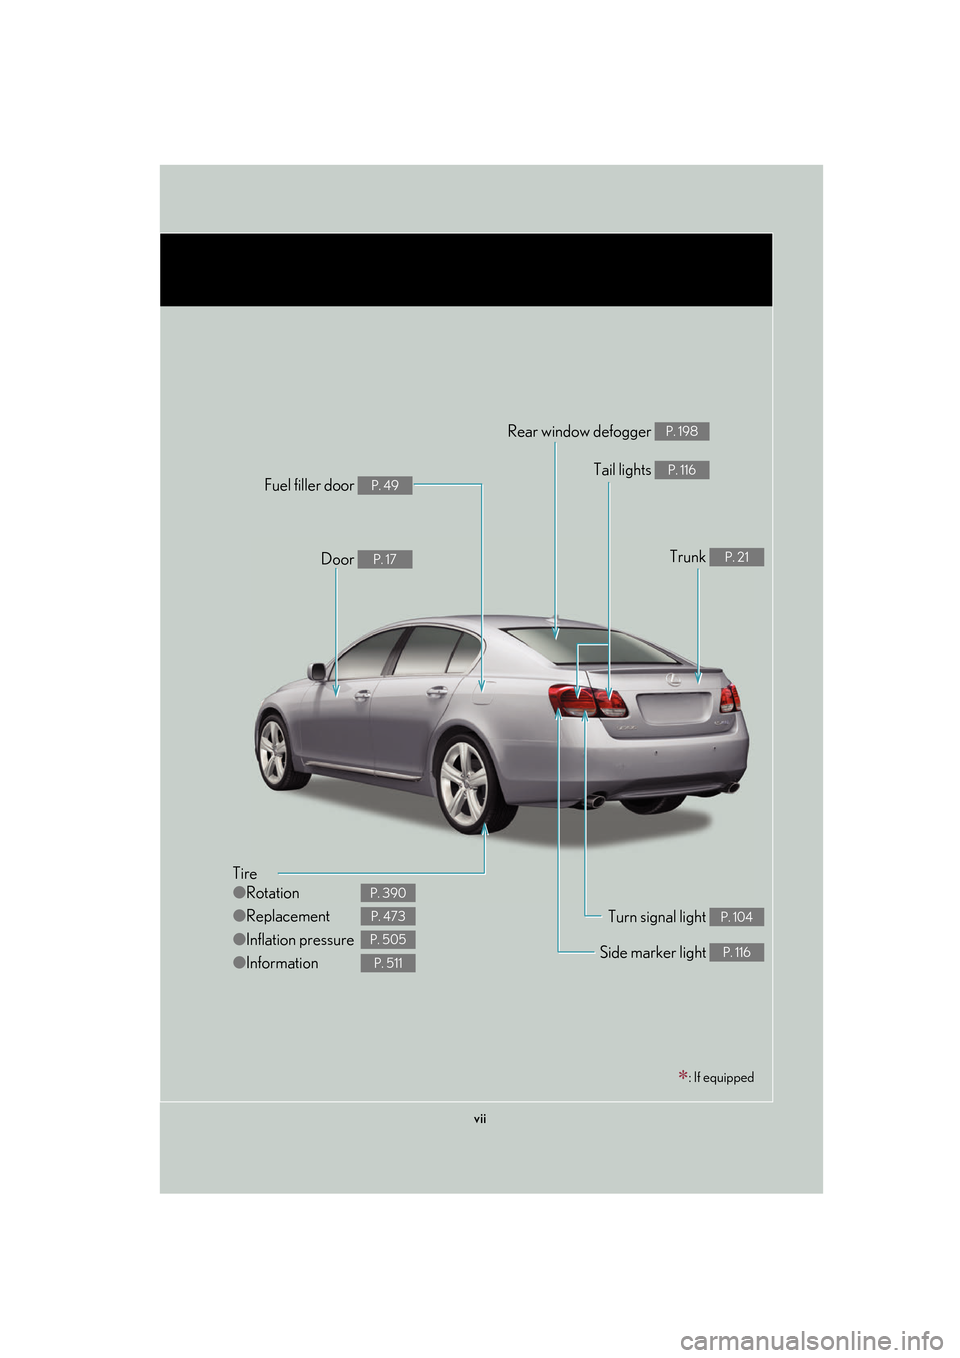 Lexus GS350 2007  Using the front audio system / LEXUS 2007 GS430/350 OWNERS MANUAL (OM30A04U) vii
Tire
●Rotation
● Replacement
● Inflation pressure
● Information
P. 390
P. 473
P. 505
P. 511
Tail lights P. 116
Side marker light P. 116
Trunk P. 21
Rear window defogger P. 198
Door P. 17
F